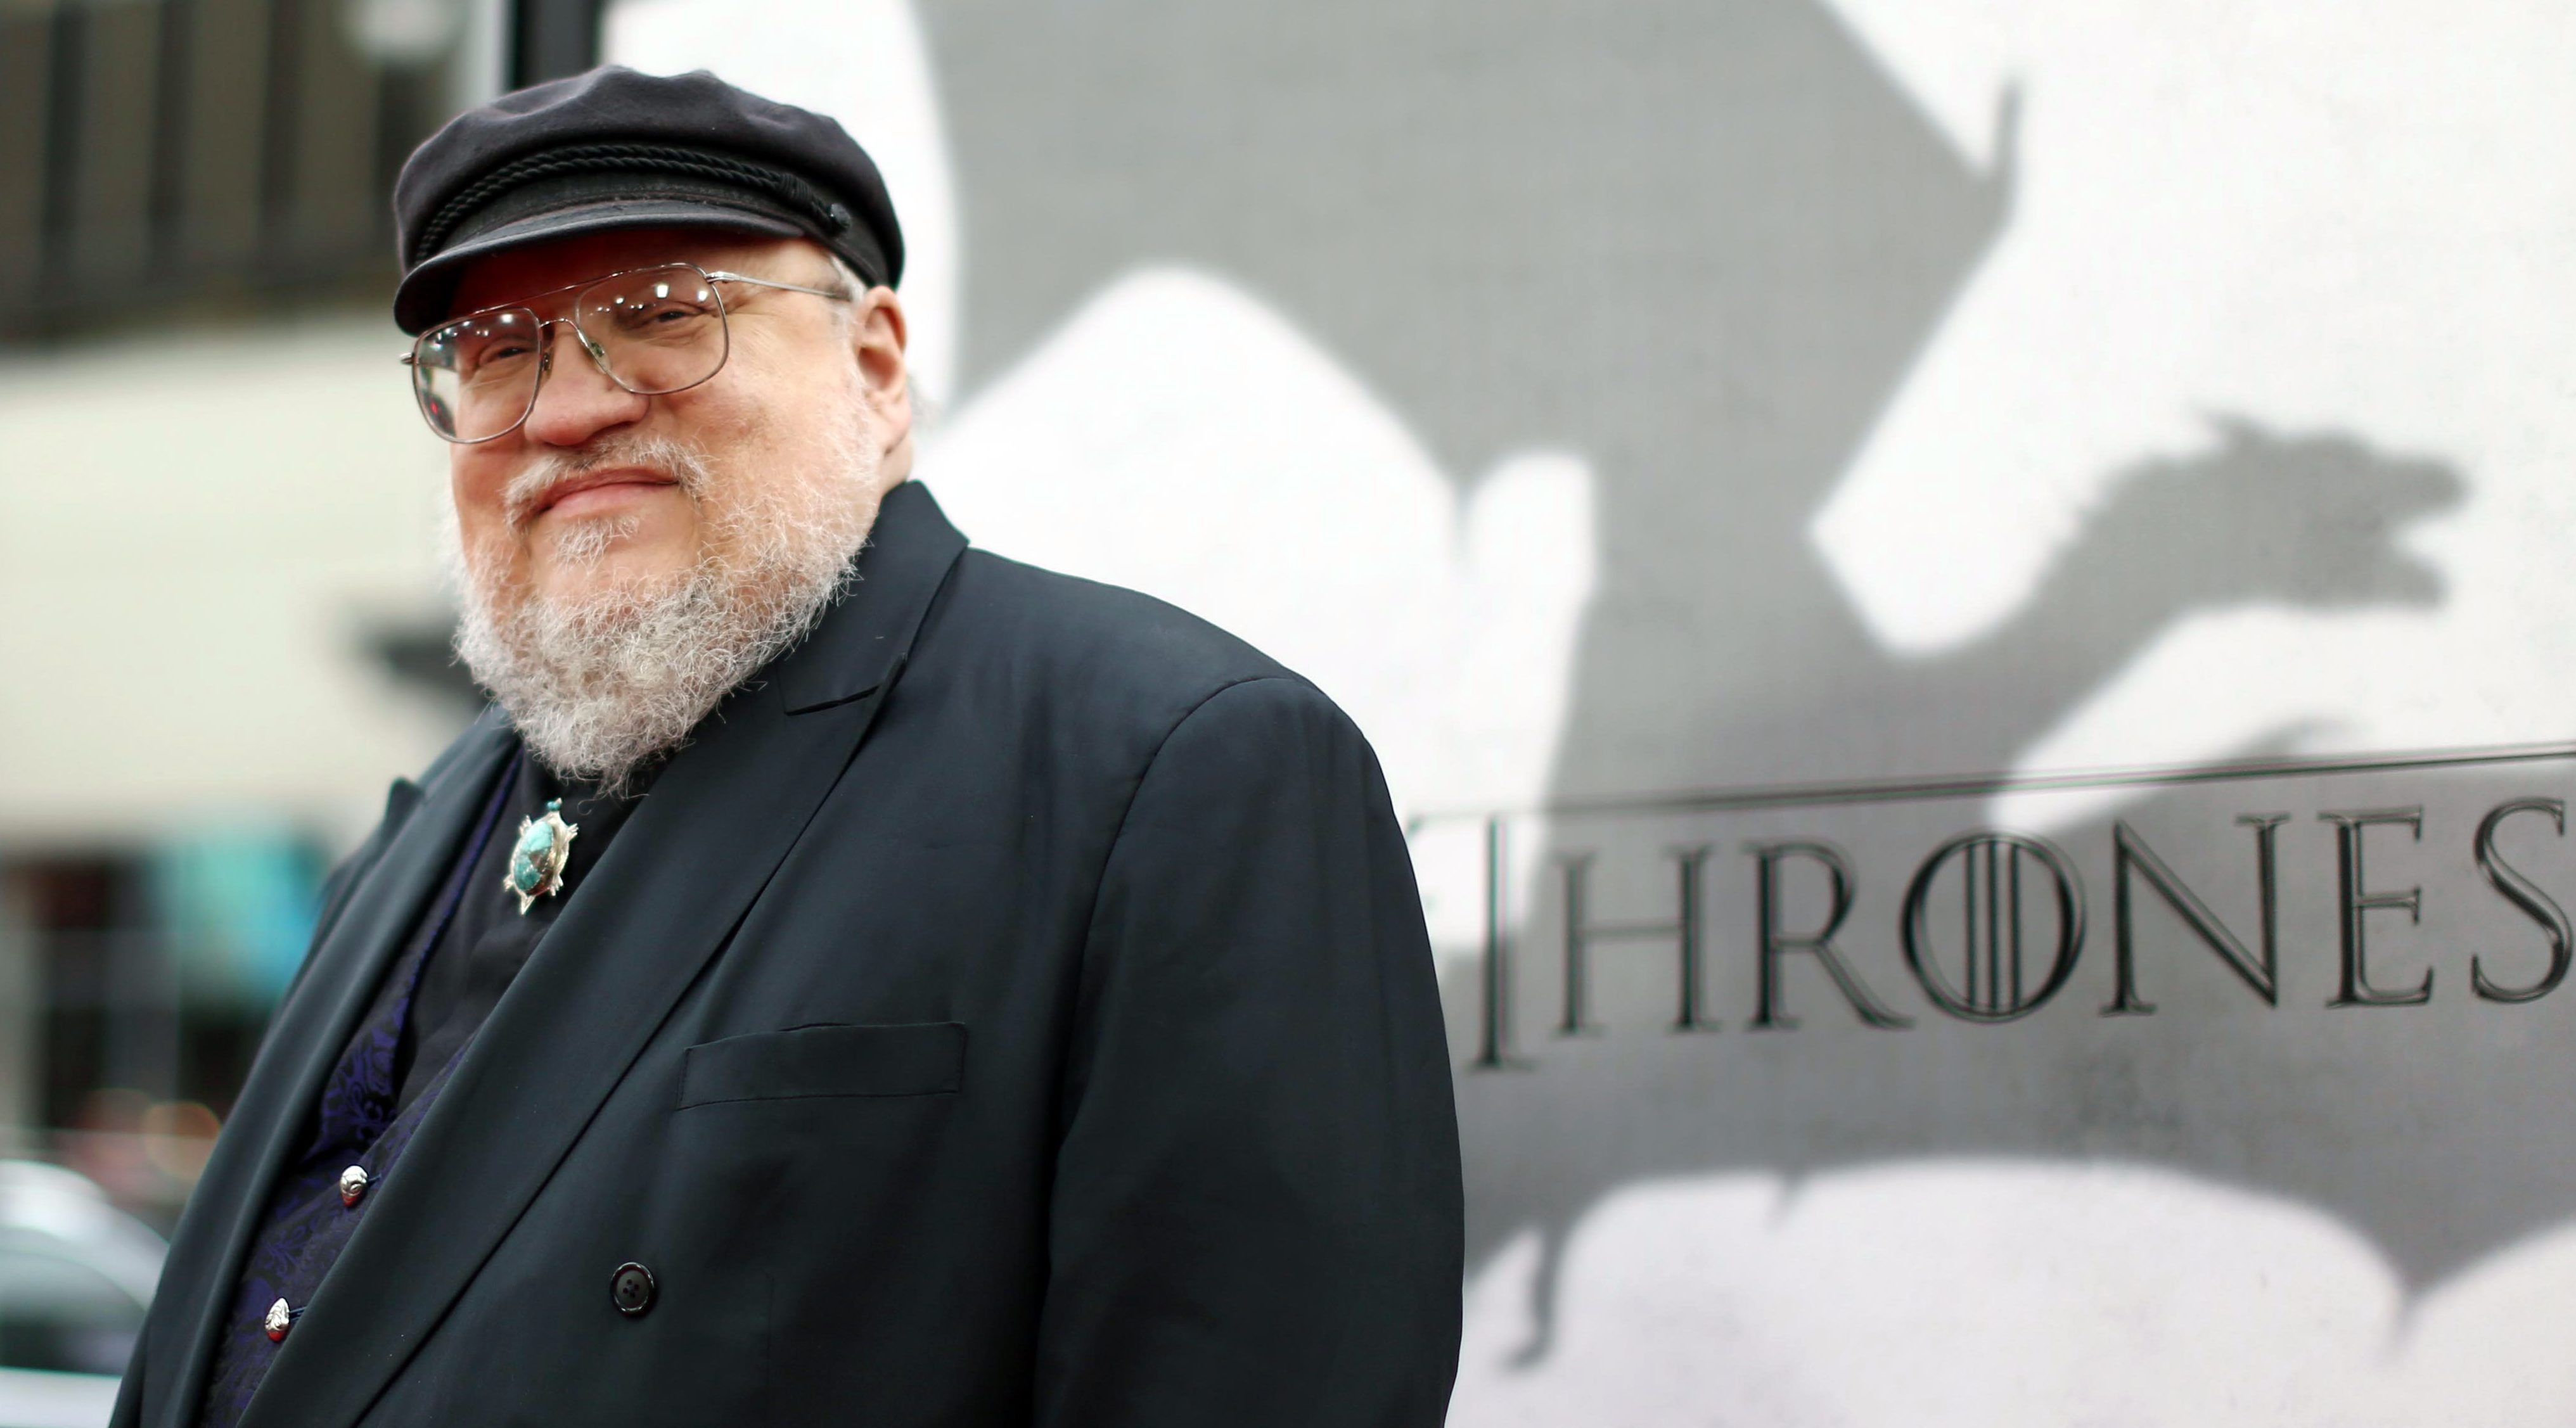 George R.R. Martin Confirms ‘Winds of Winter’ Won’t be Released in 2018